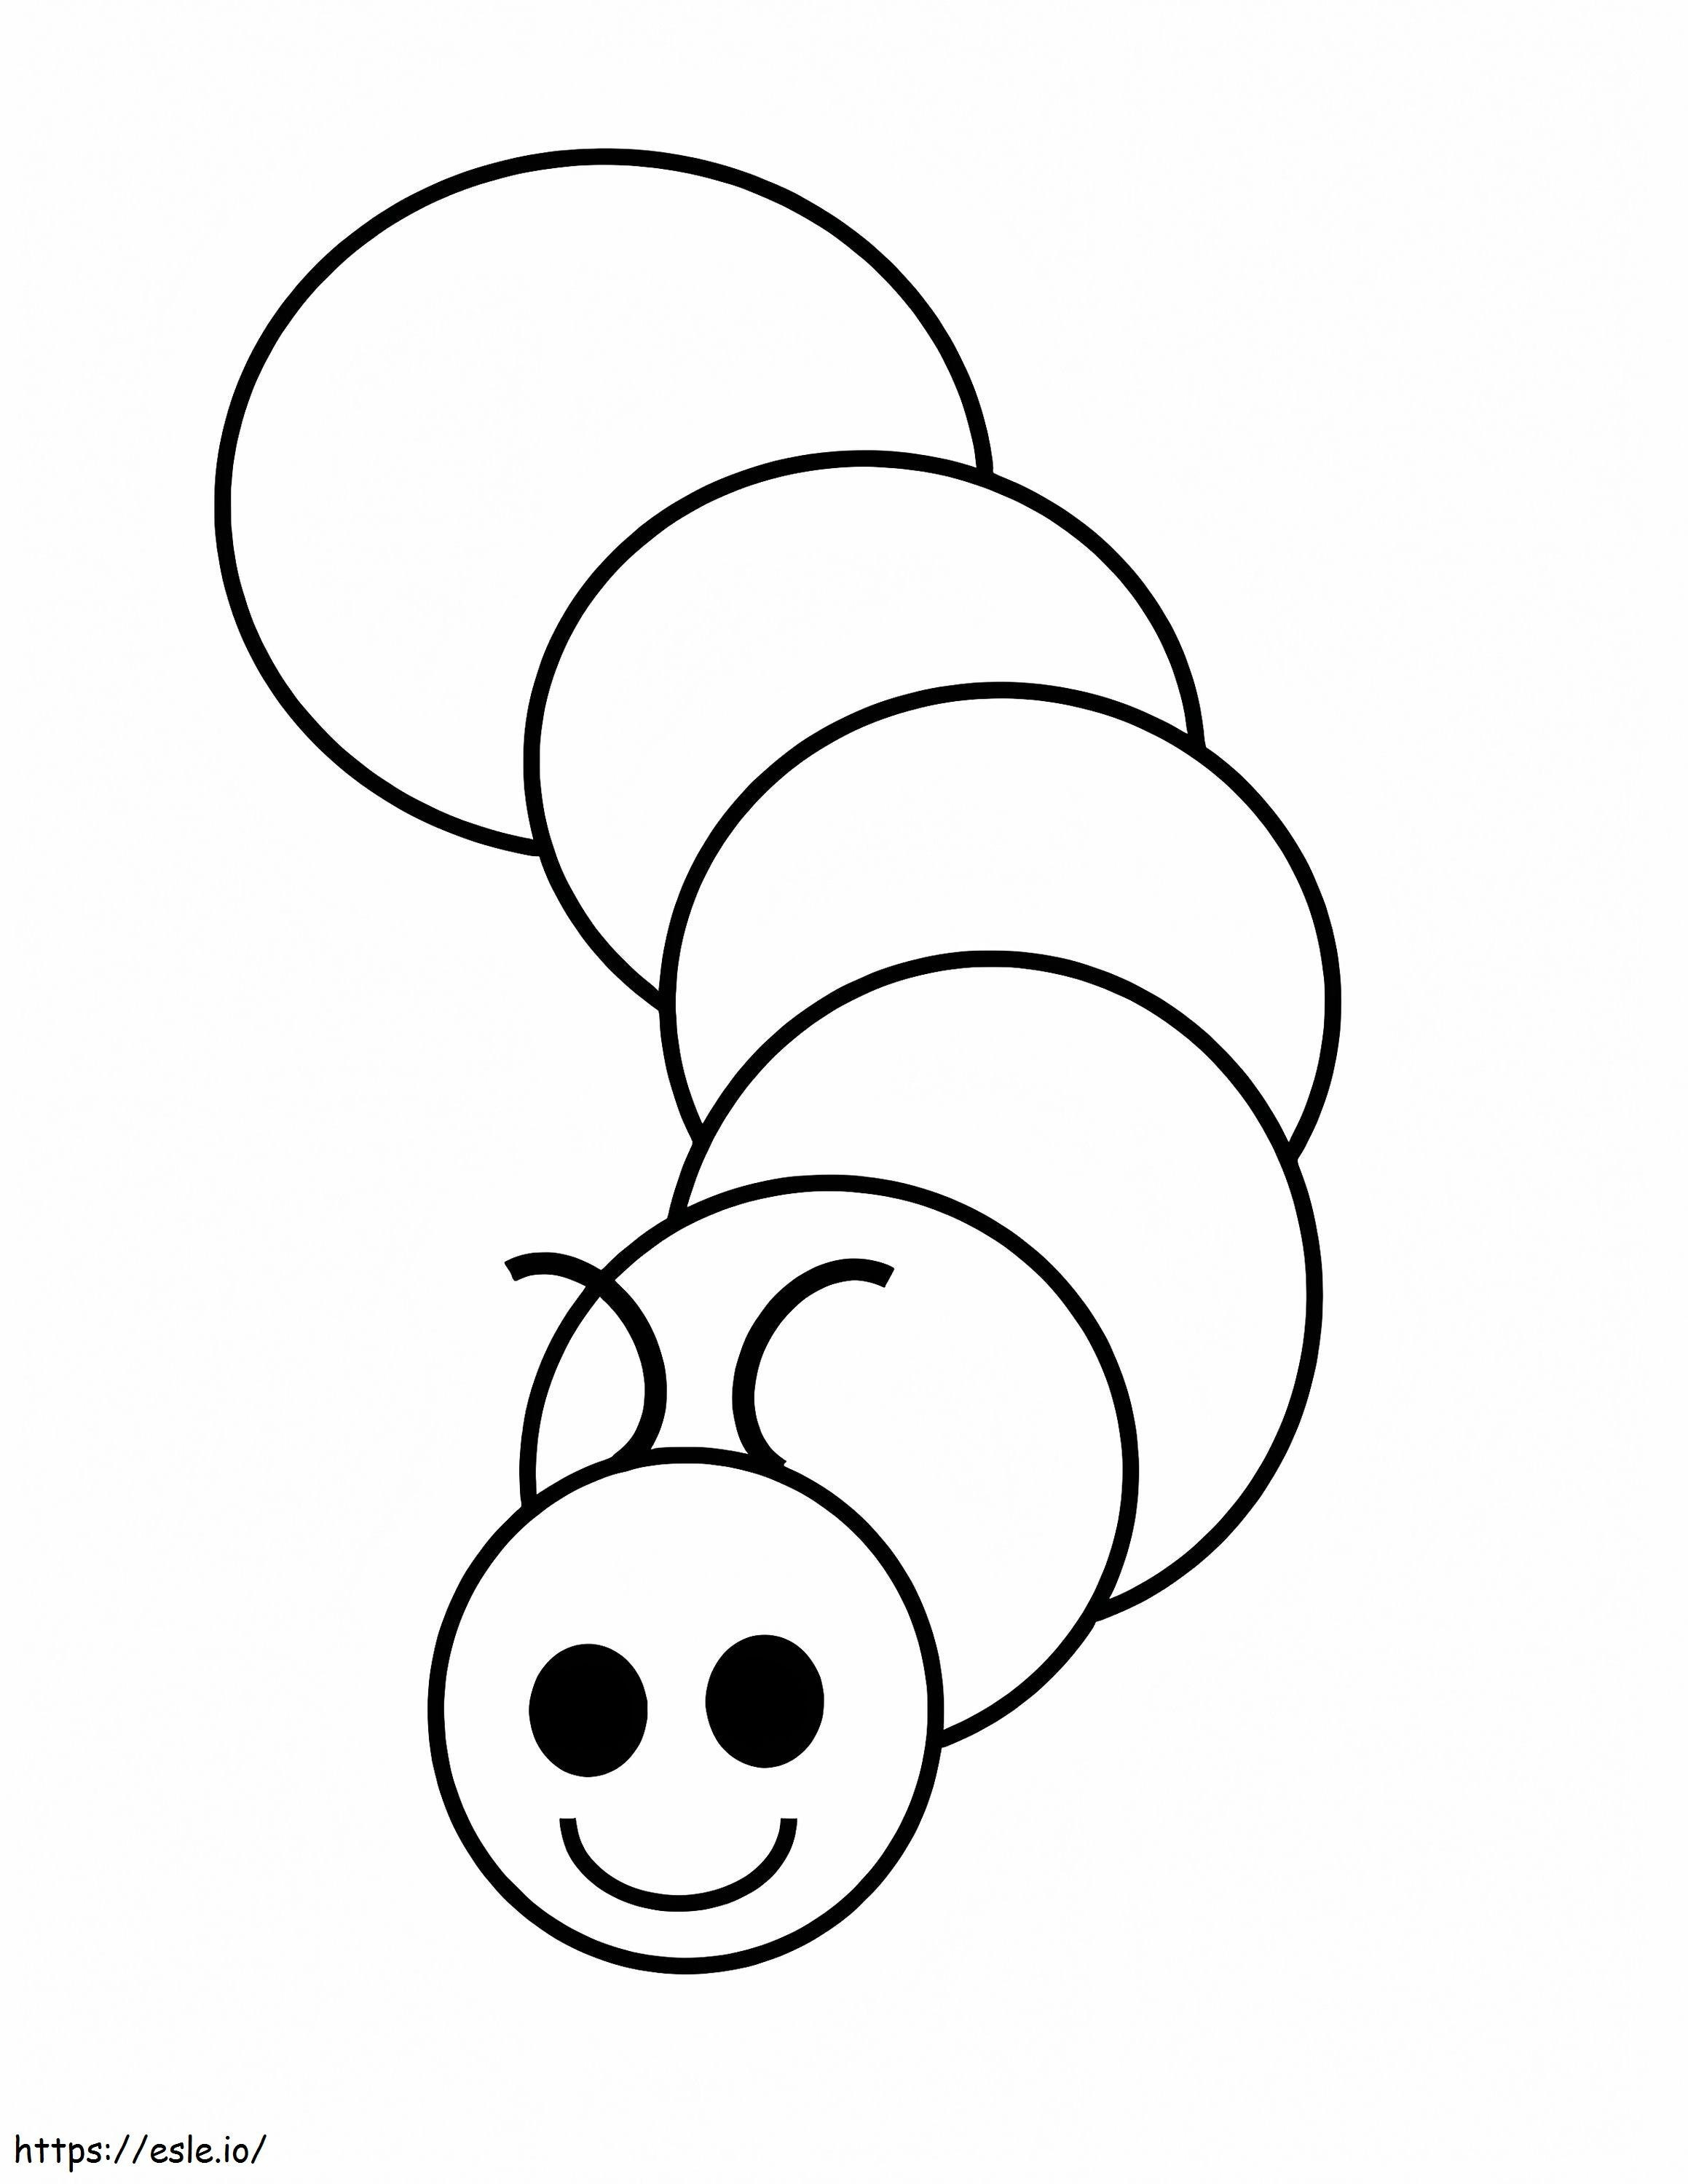 Walking Worm coloring page